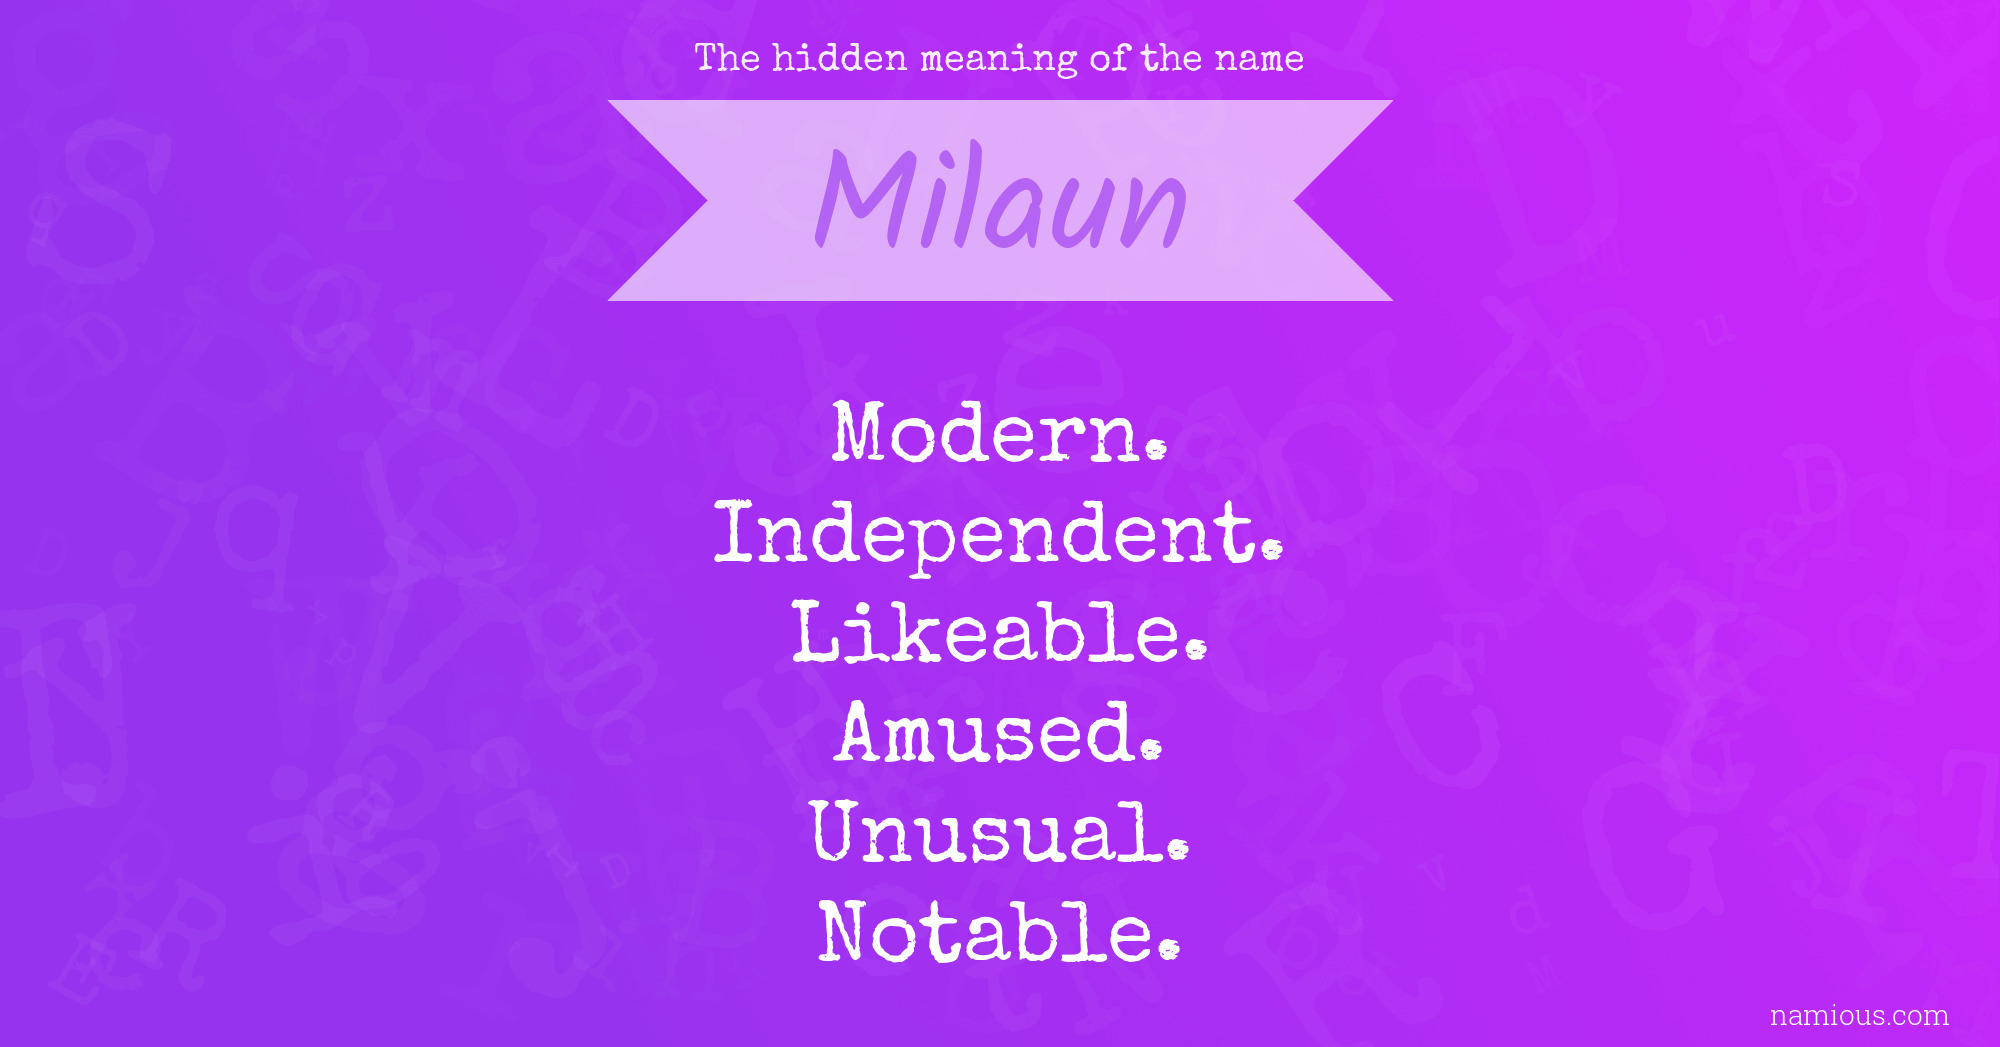 The hidden meaning of the name Milaun